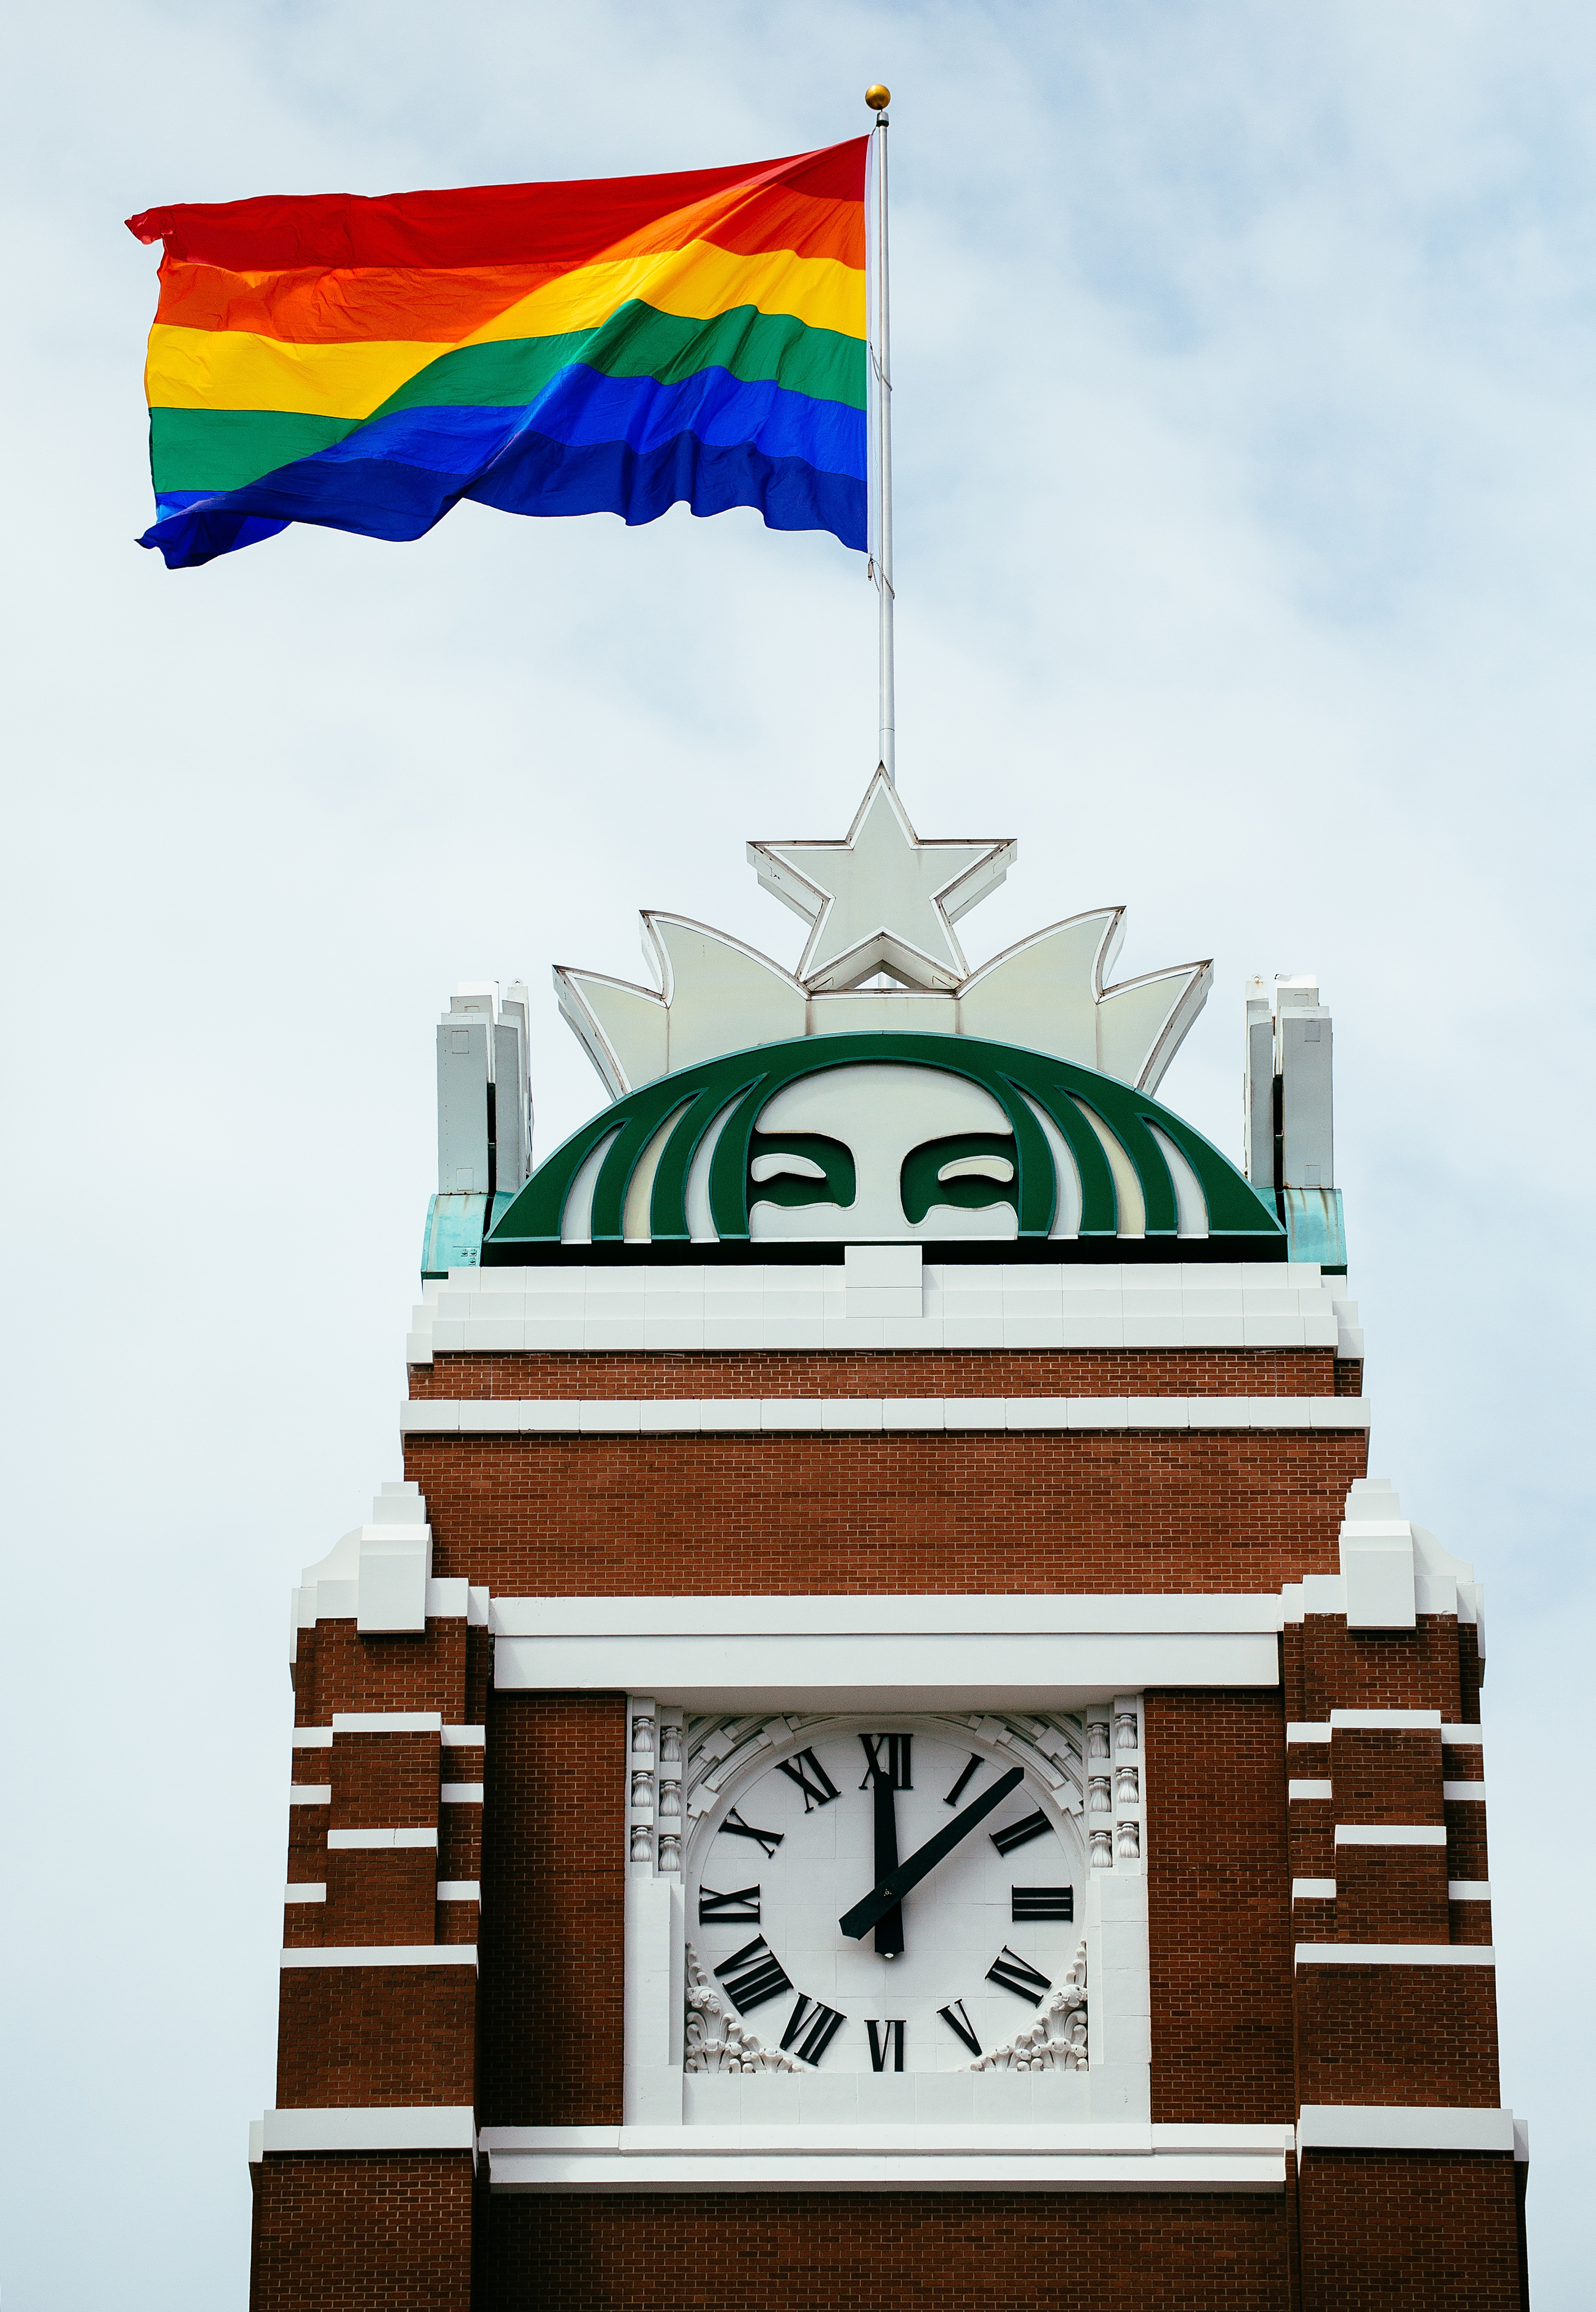 Starbucks marked the 40th anniversary of Seattle Pride by raising an 800-square-foot flag at its corporate headquarters as a group of employees and CEO Howard Schultz watched from below in Seattle on June 20, 2014.